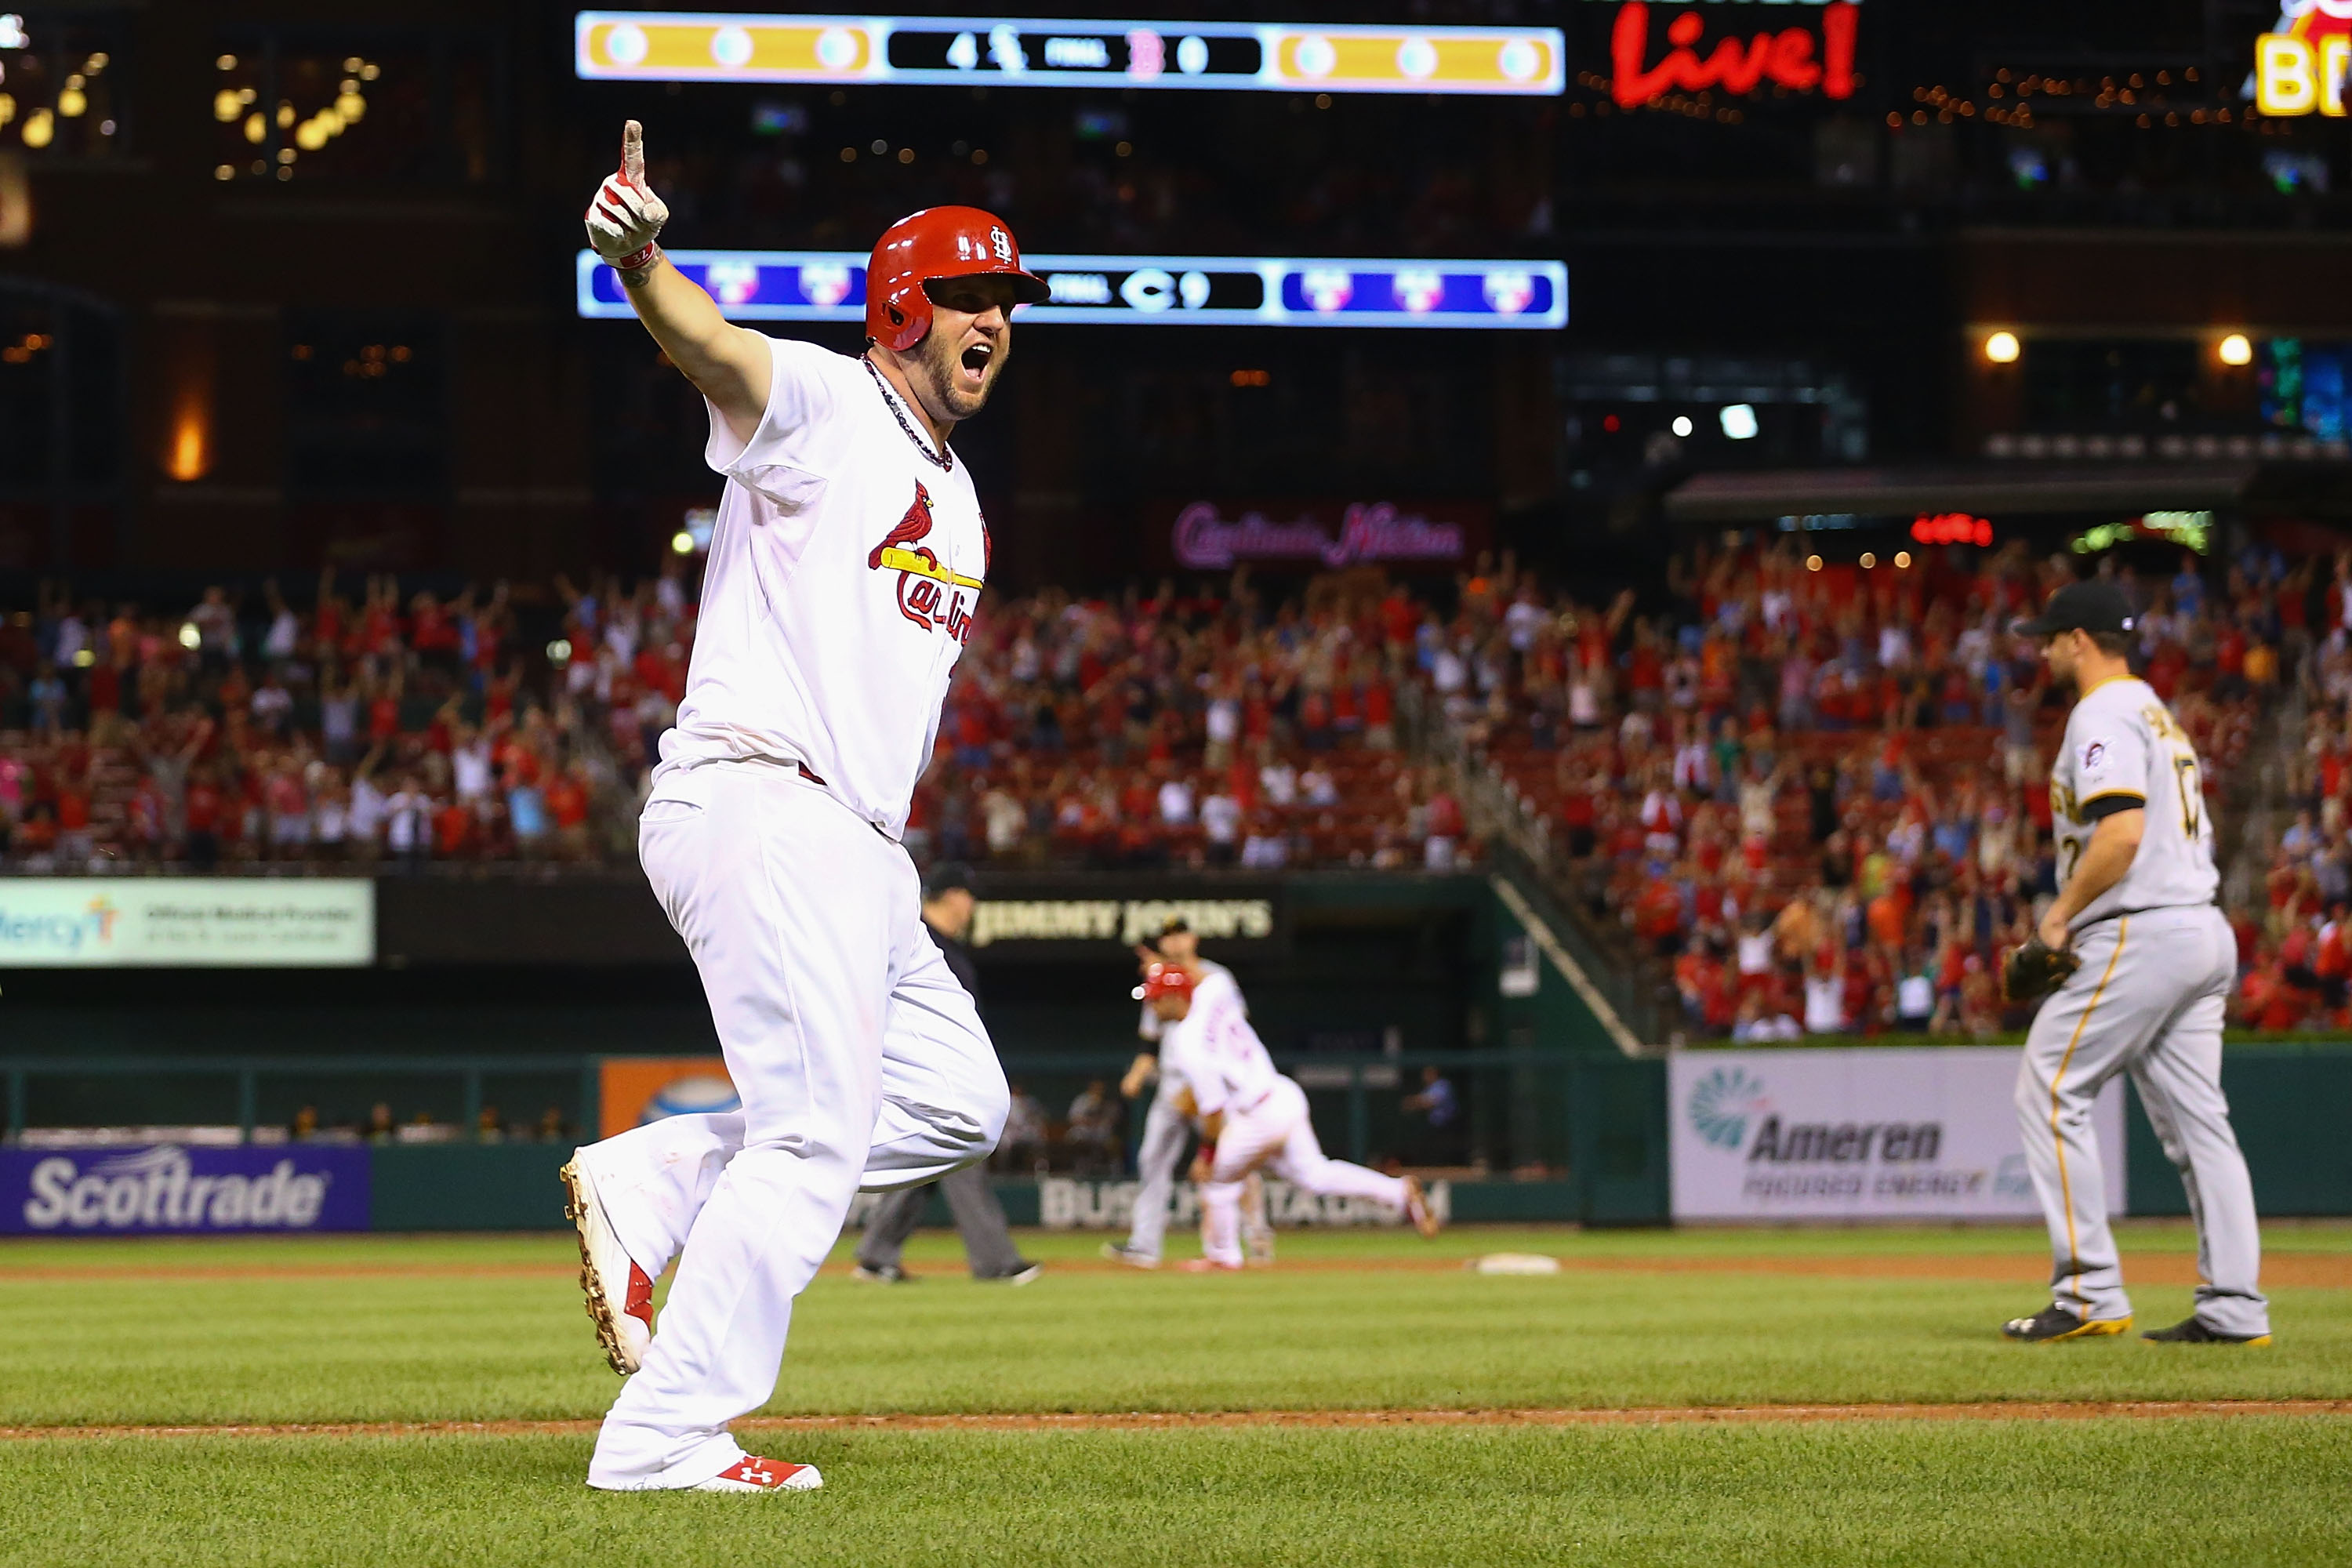 ST. LOUIS, MO - JULY 7: Matt Adams #32 of the St. Louis Cardinals celebrates after hitting a two-run walk-off home run against the Pittsburgh Pirates in the ninth inning at Busch Stadium on July 7, 2014 in St. Louis, Missouri.  The Cardinals beat the Pirates 2-0 with a walk-off home run.